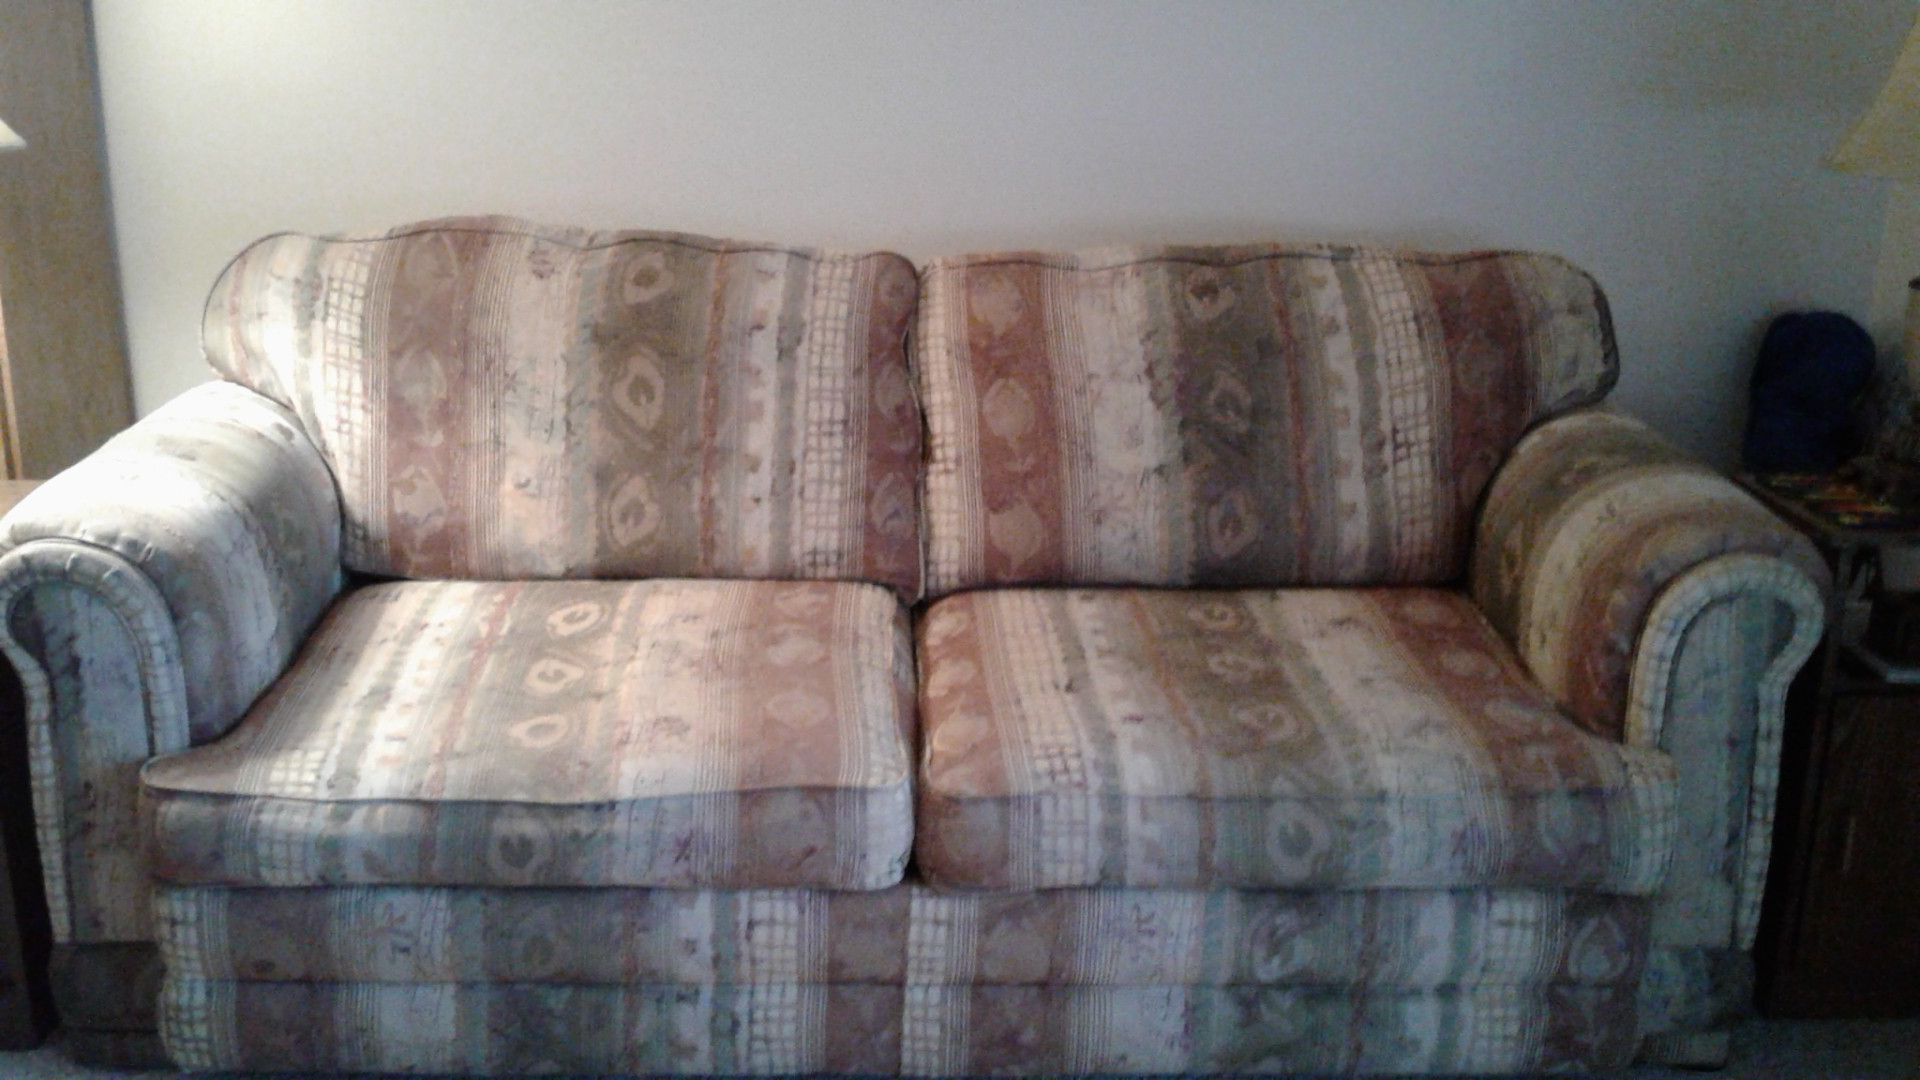 Sofa 84 in. wide- free, good condition. Must pick up.